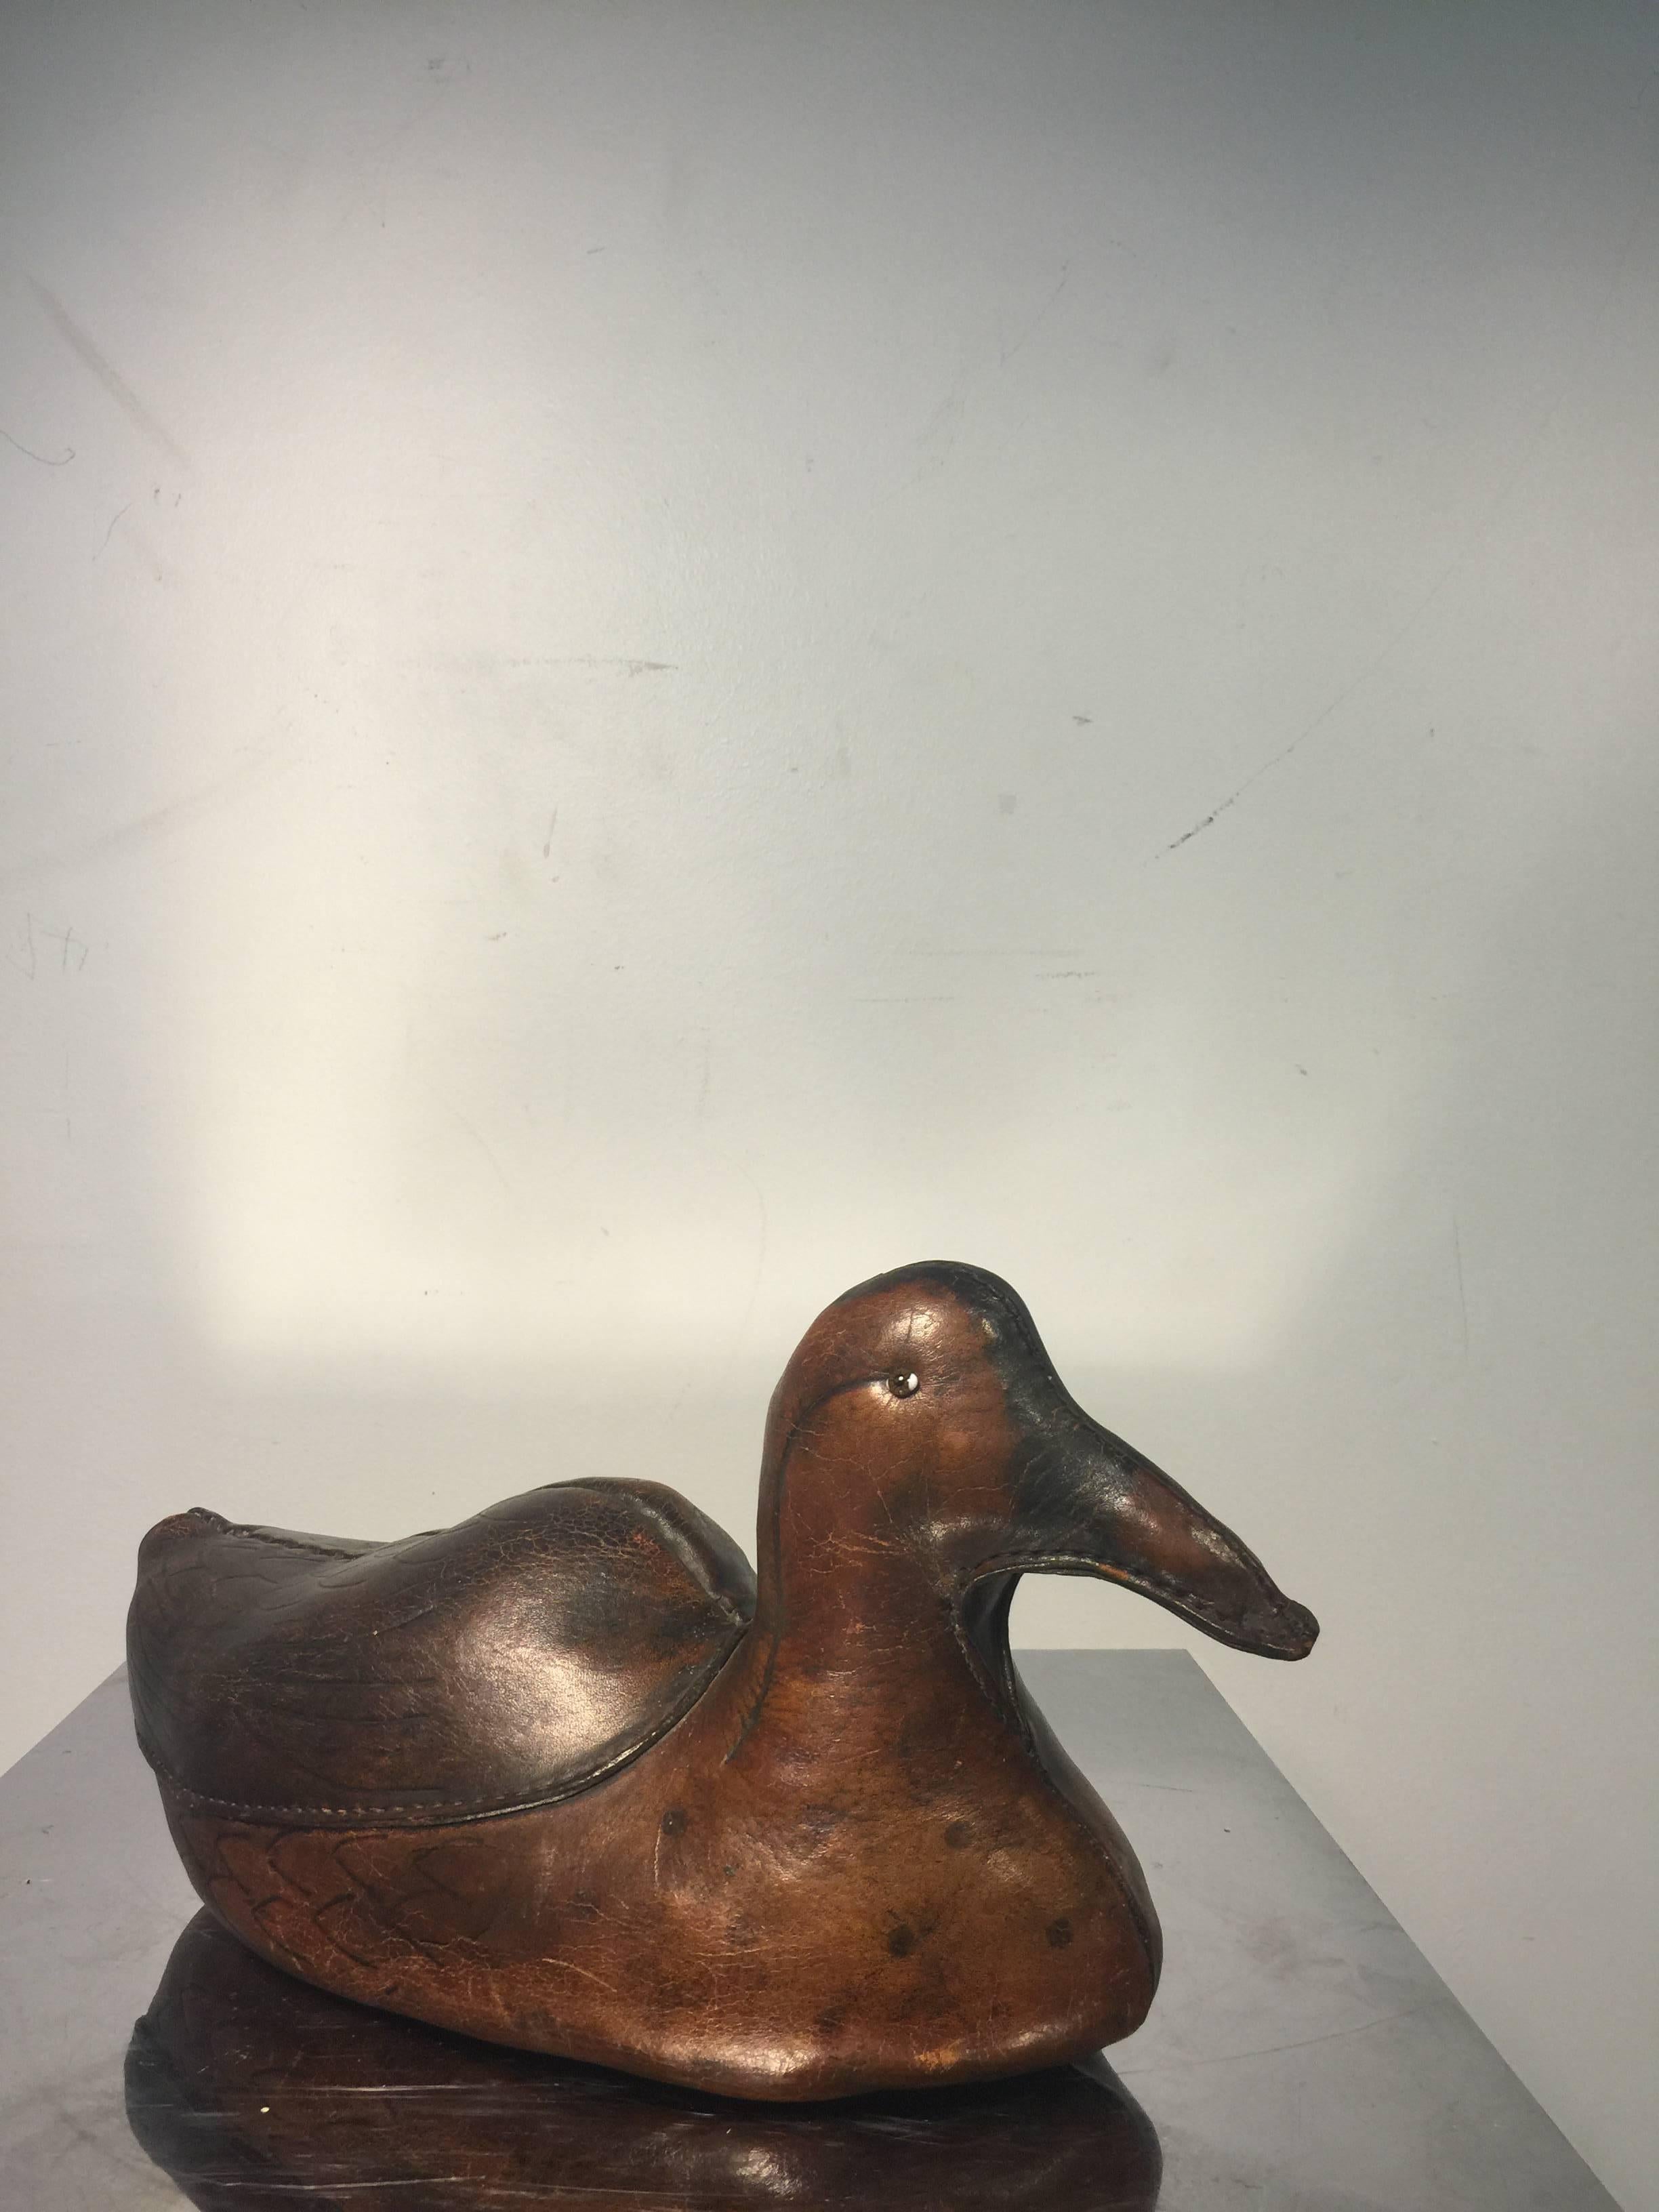 An amazing sculptural leather duck by Abercrombie and Fitch, circa 1950.